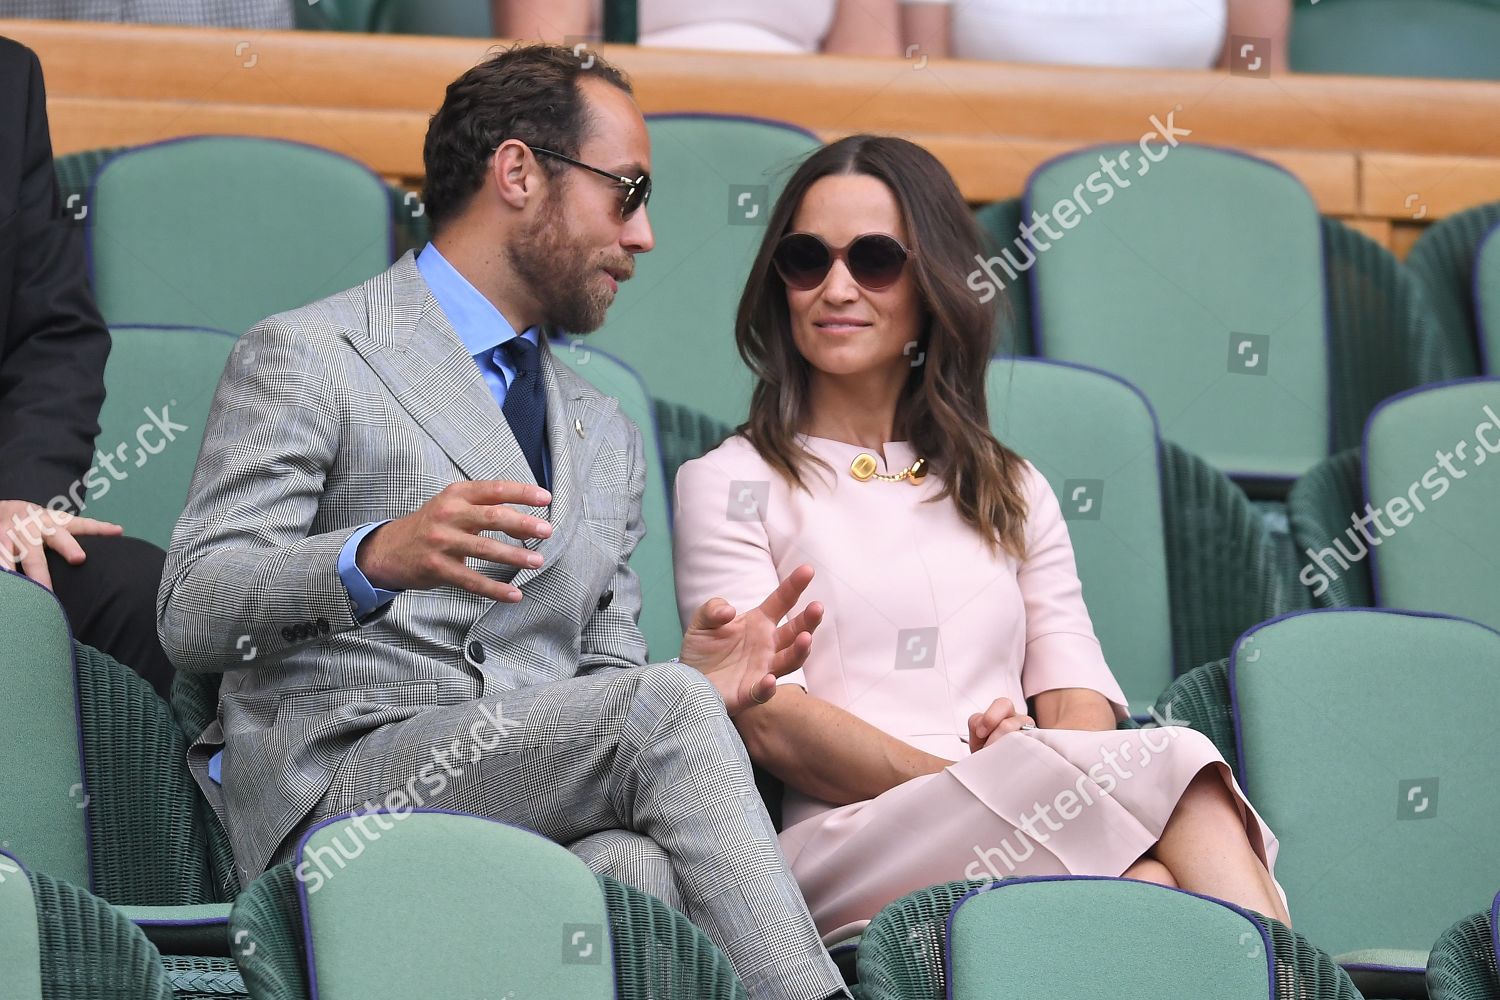 wimbledon-tennis-championships-day-7-the-all-england-lawn-tennis-and-croquet-club-london-uk-shutterstock-editorial-10330000fh.jpg